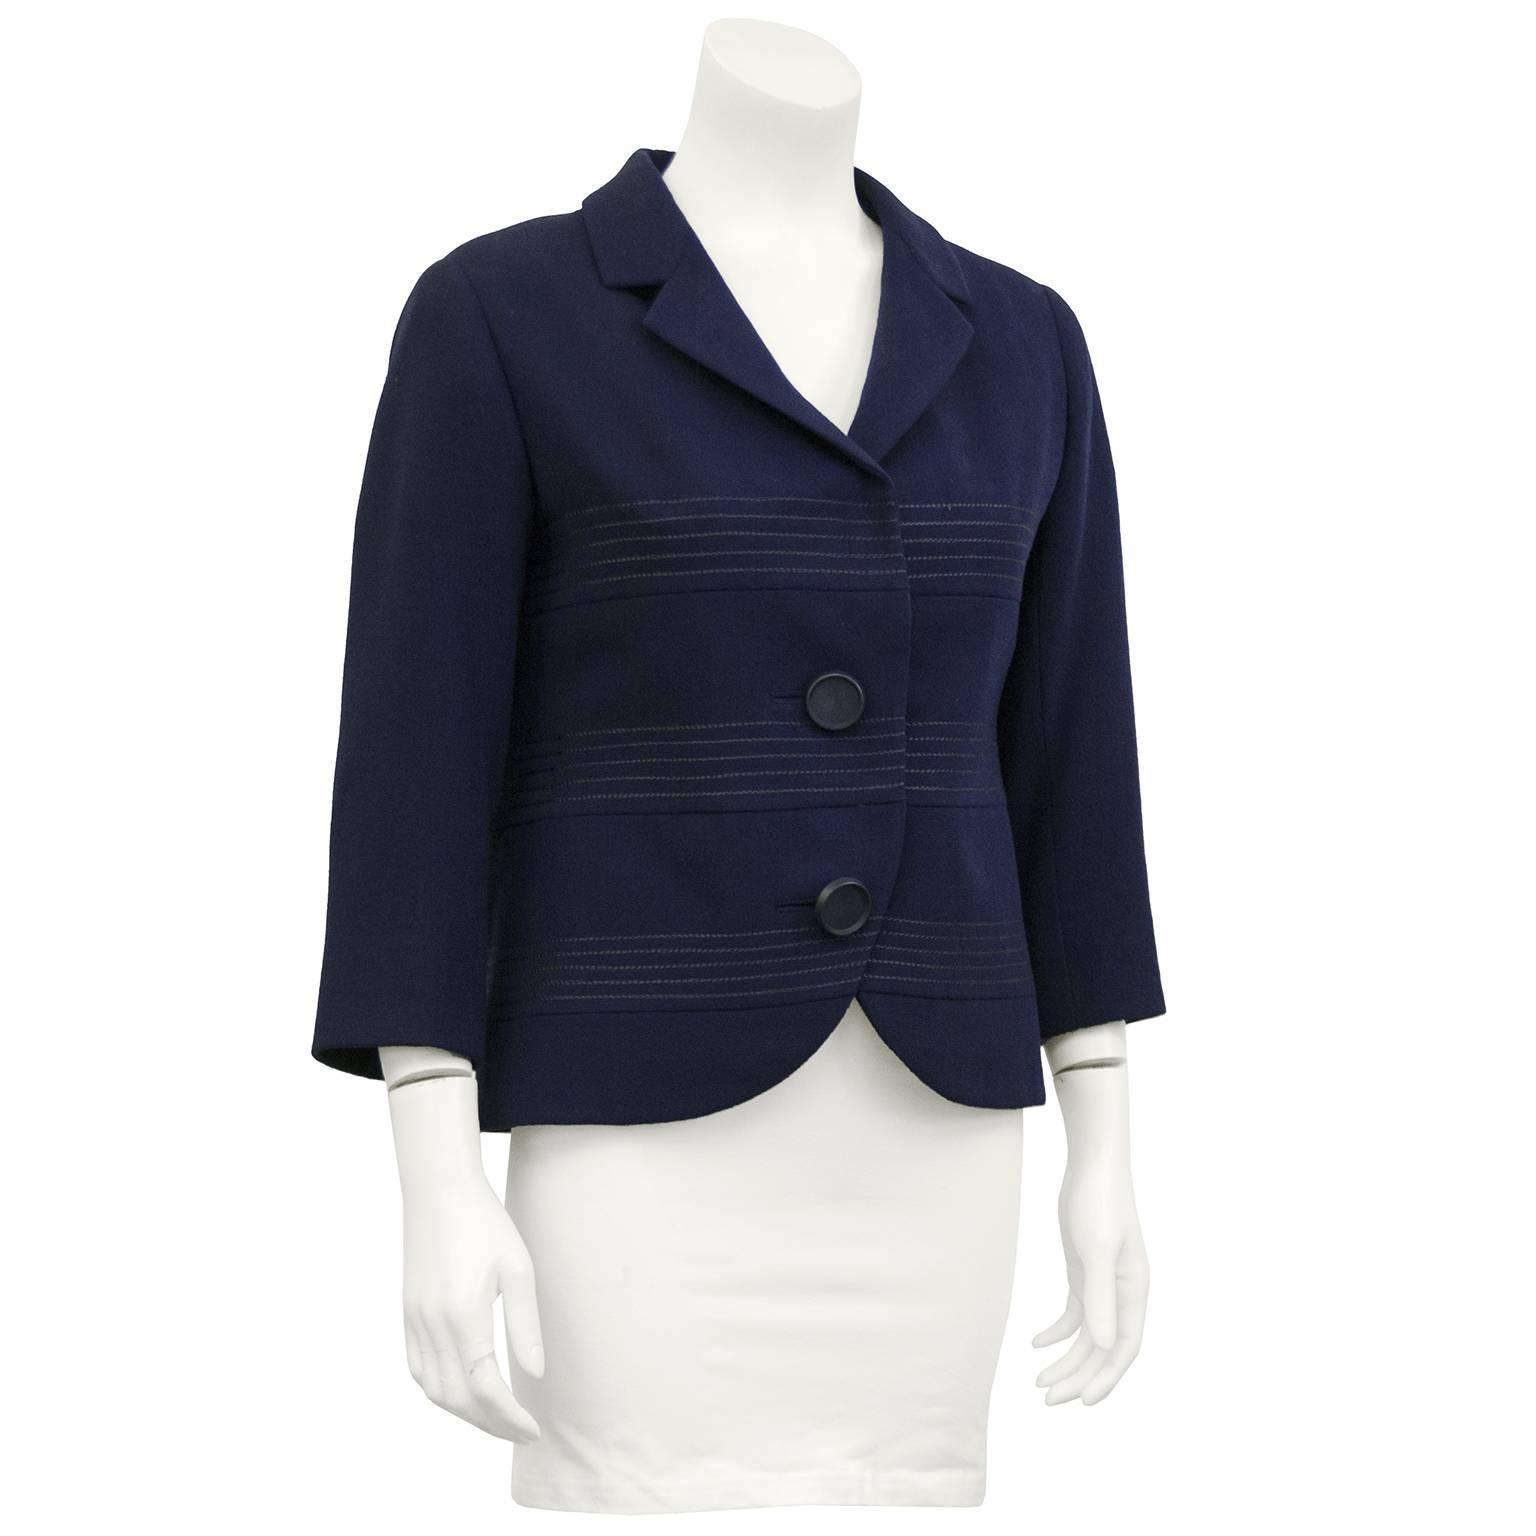 Christian Dior Original label Navy wool cropped jacket from the 1960s. Notched collar lapel with banded detail across the body. Two large navy buttons up the front with hidden hooks to secure closure. 3/4 length sleeves and cutaway detail at the